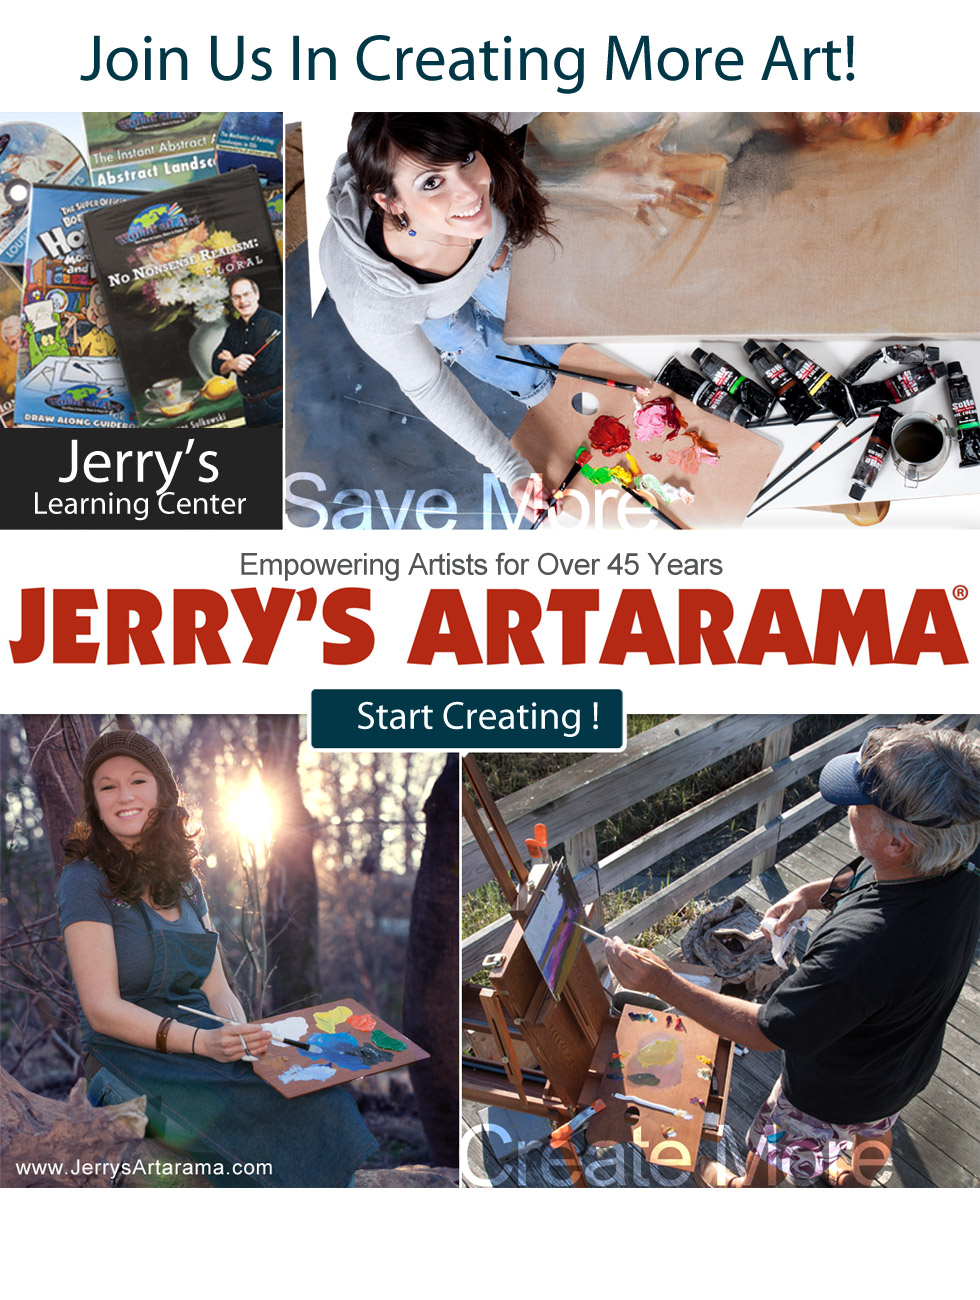 Jerry's Artarama online learning and art center